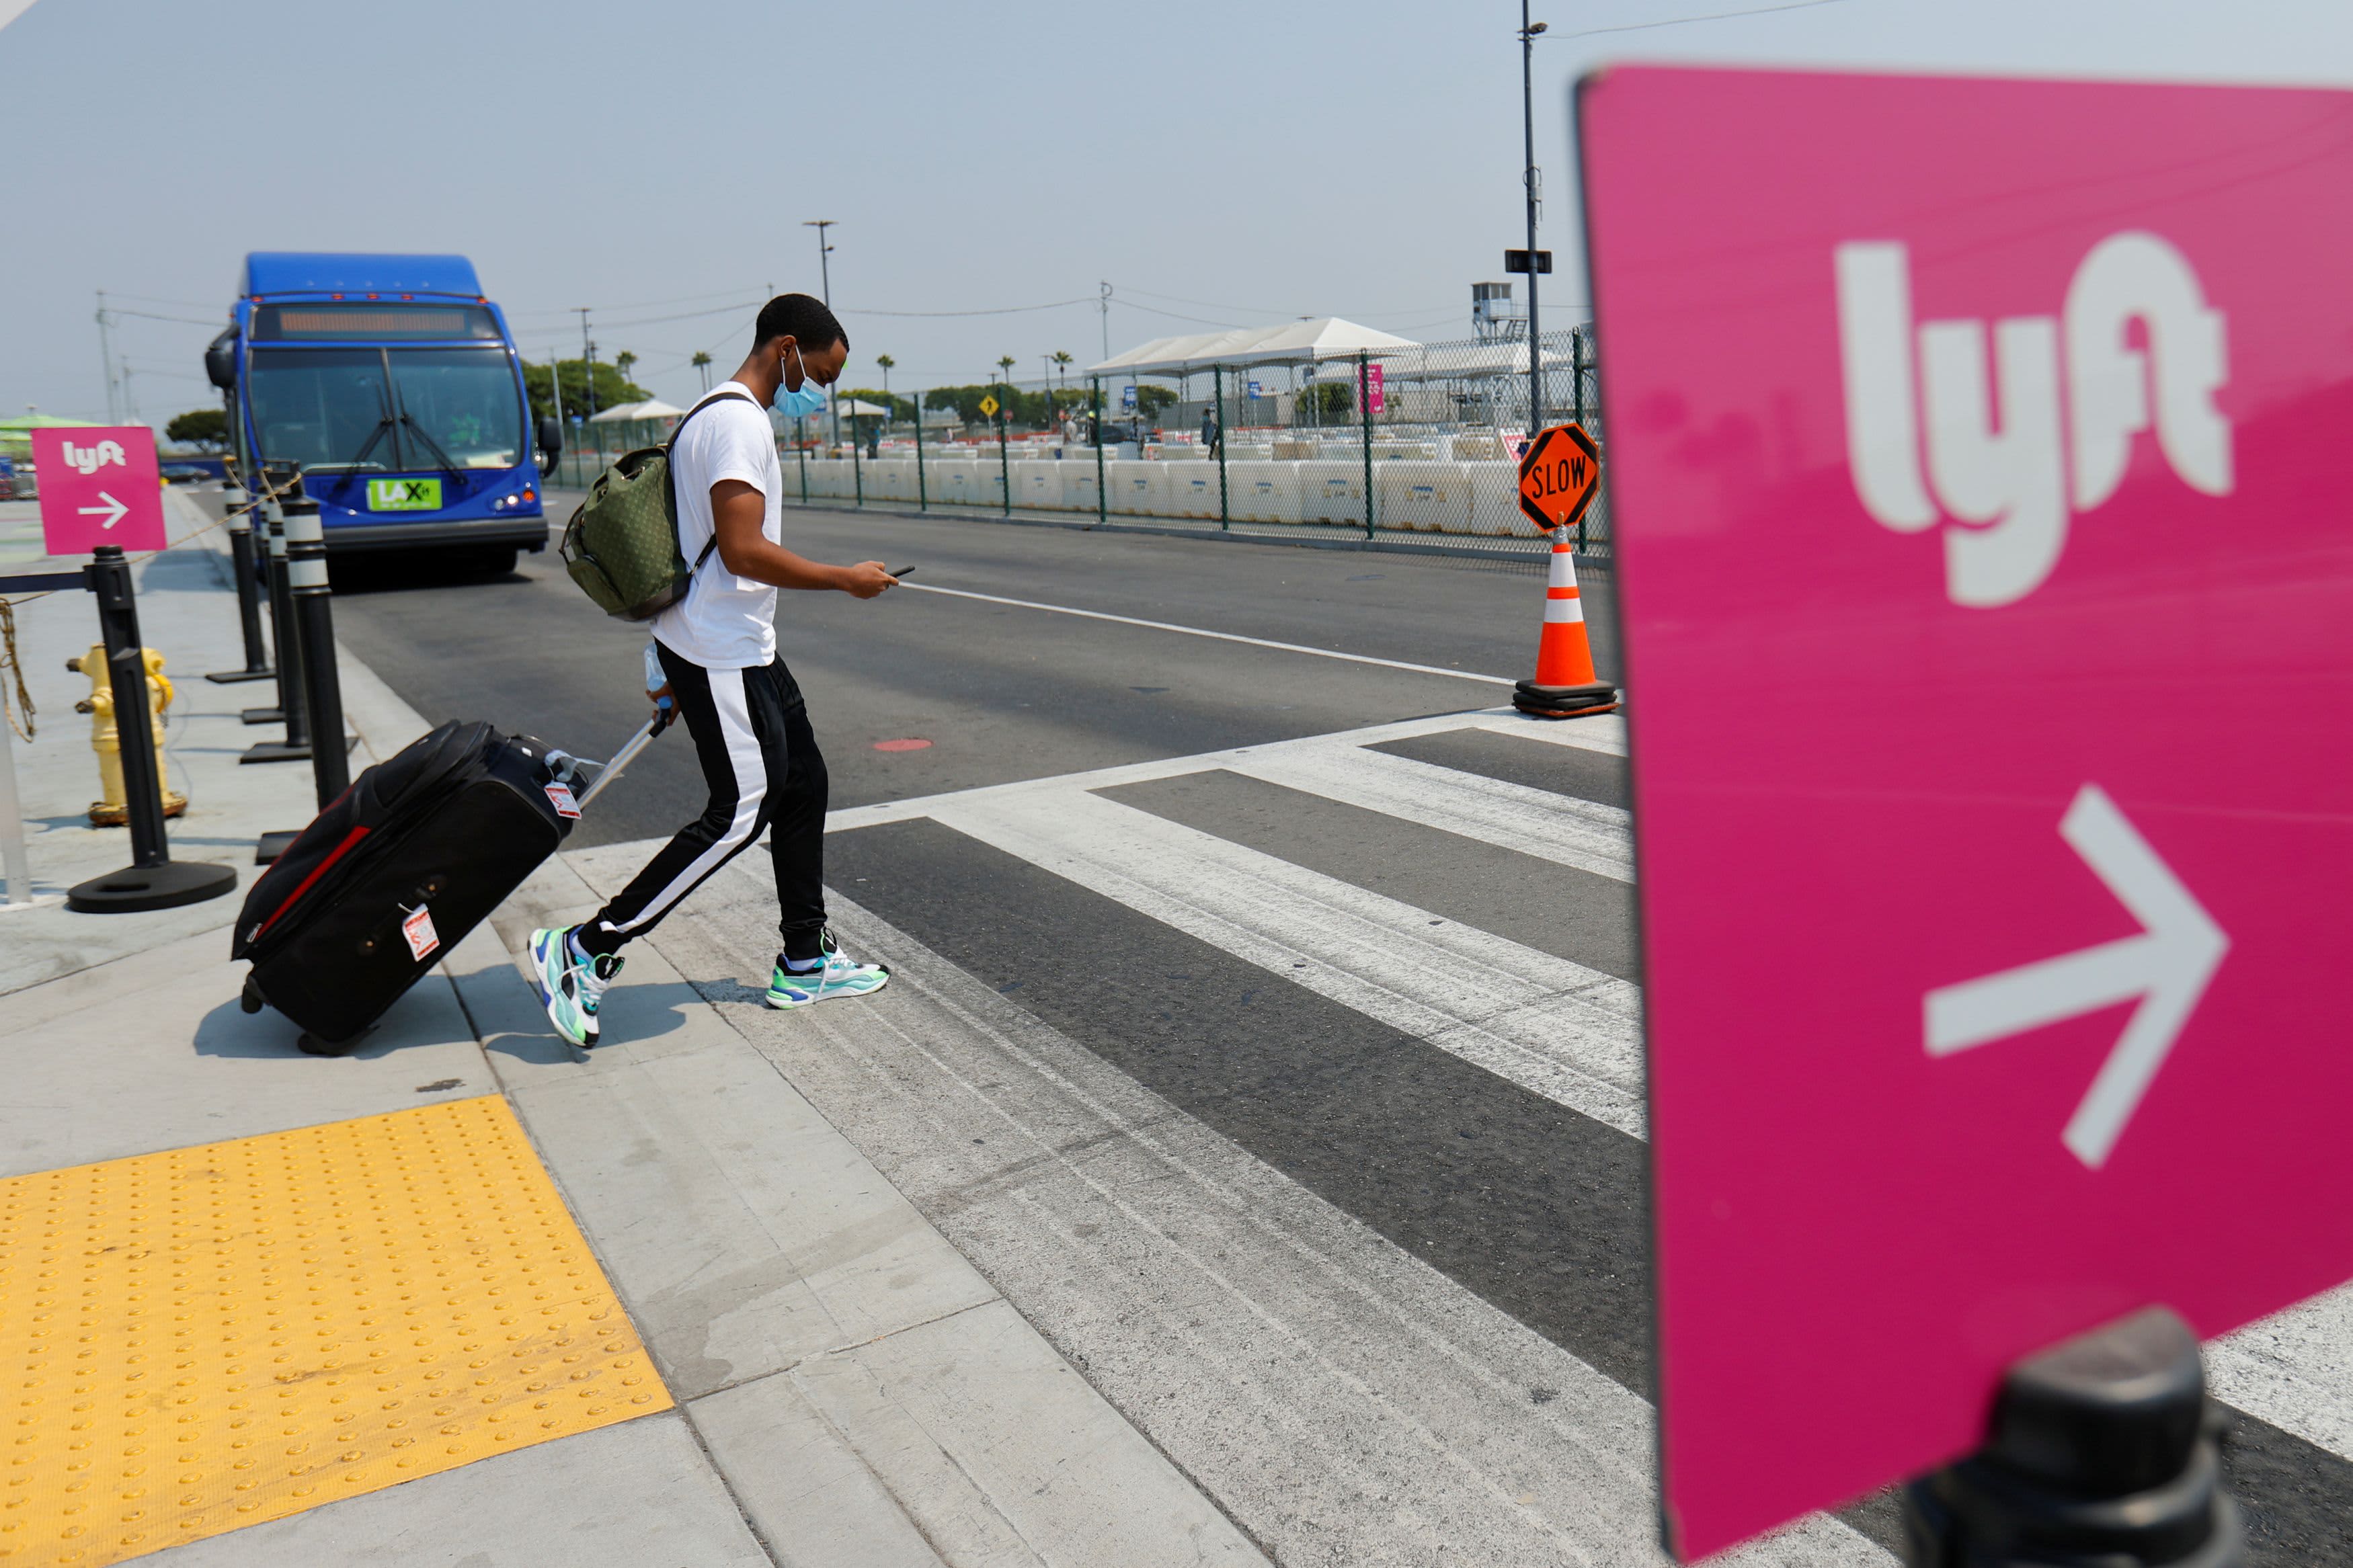 Lyft’s new CEO begins layoffs, reportedly cutting 1,200 jobs